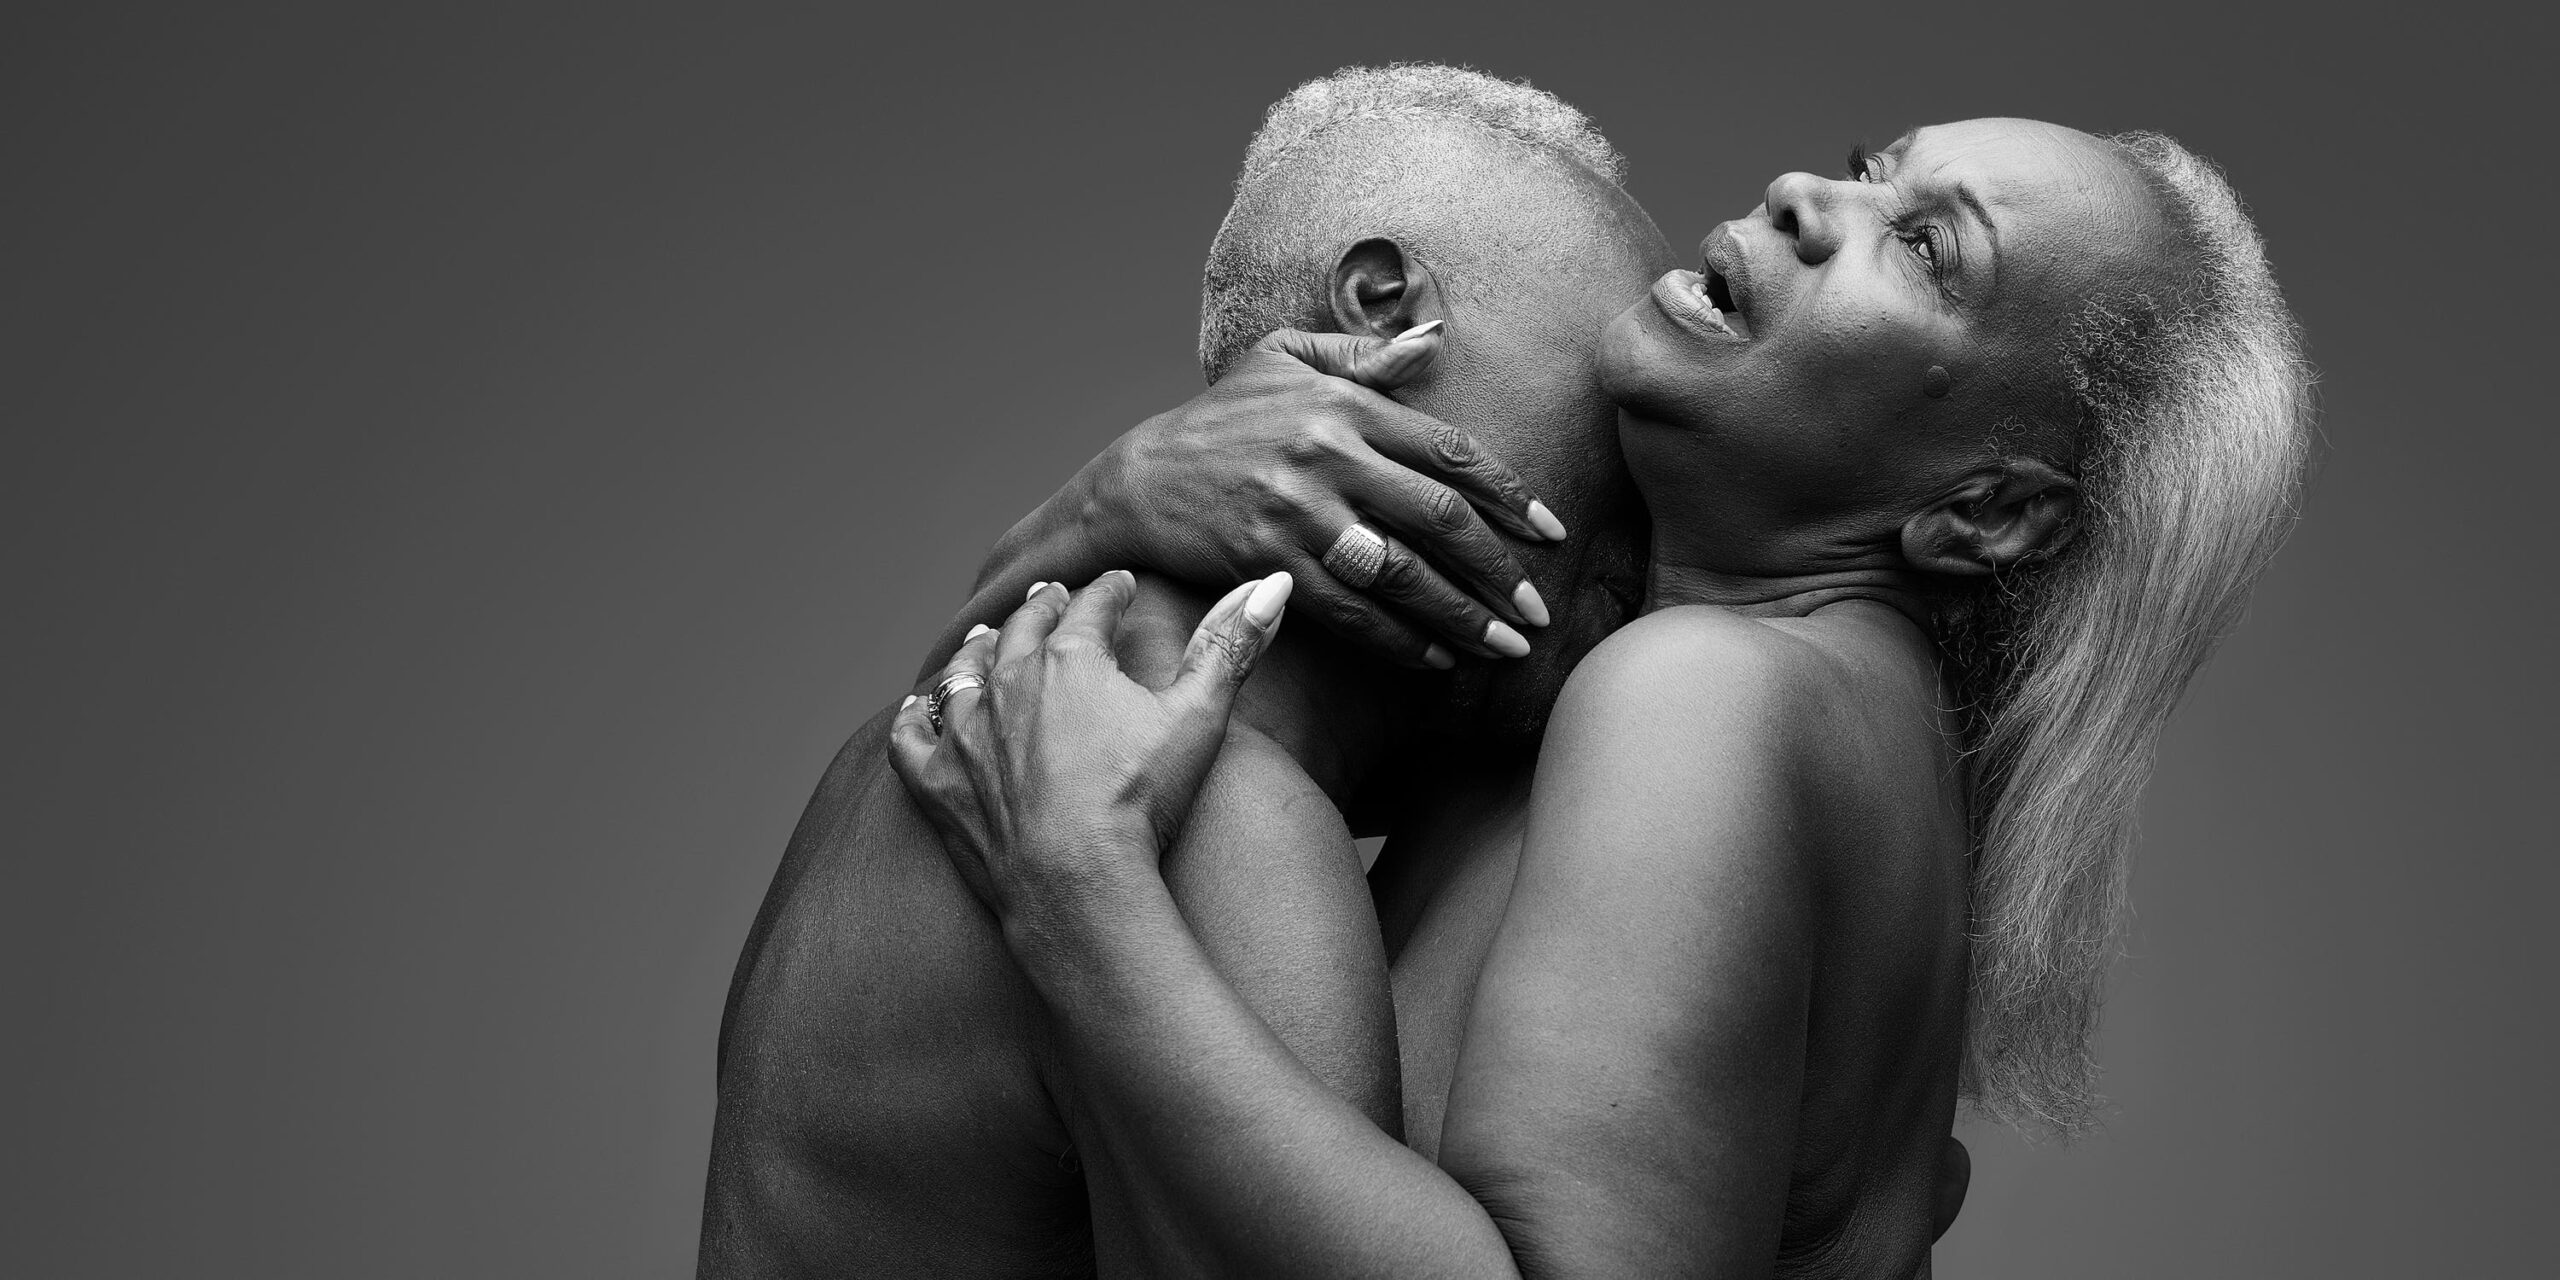 Rankin and relate’s campaign celebrating intimacy